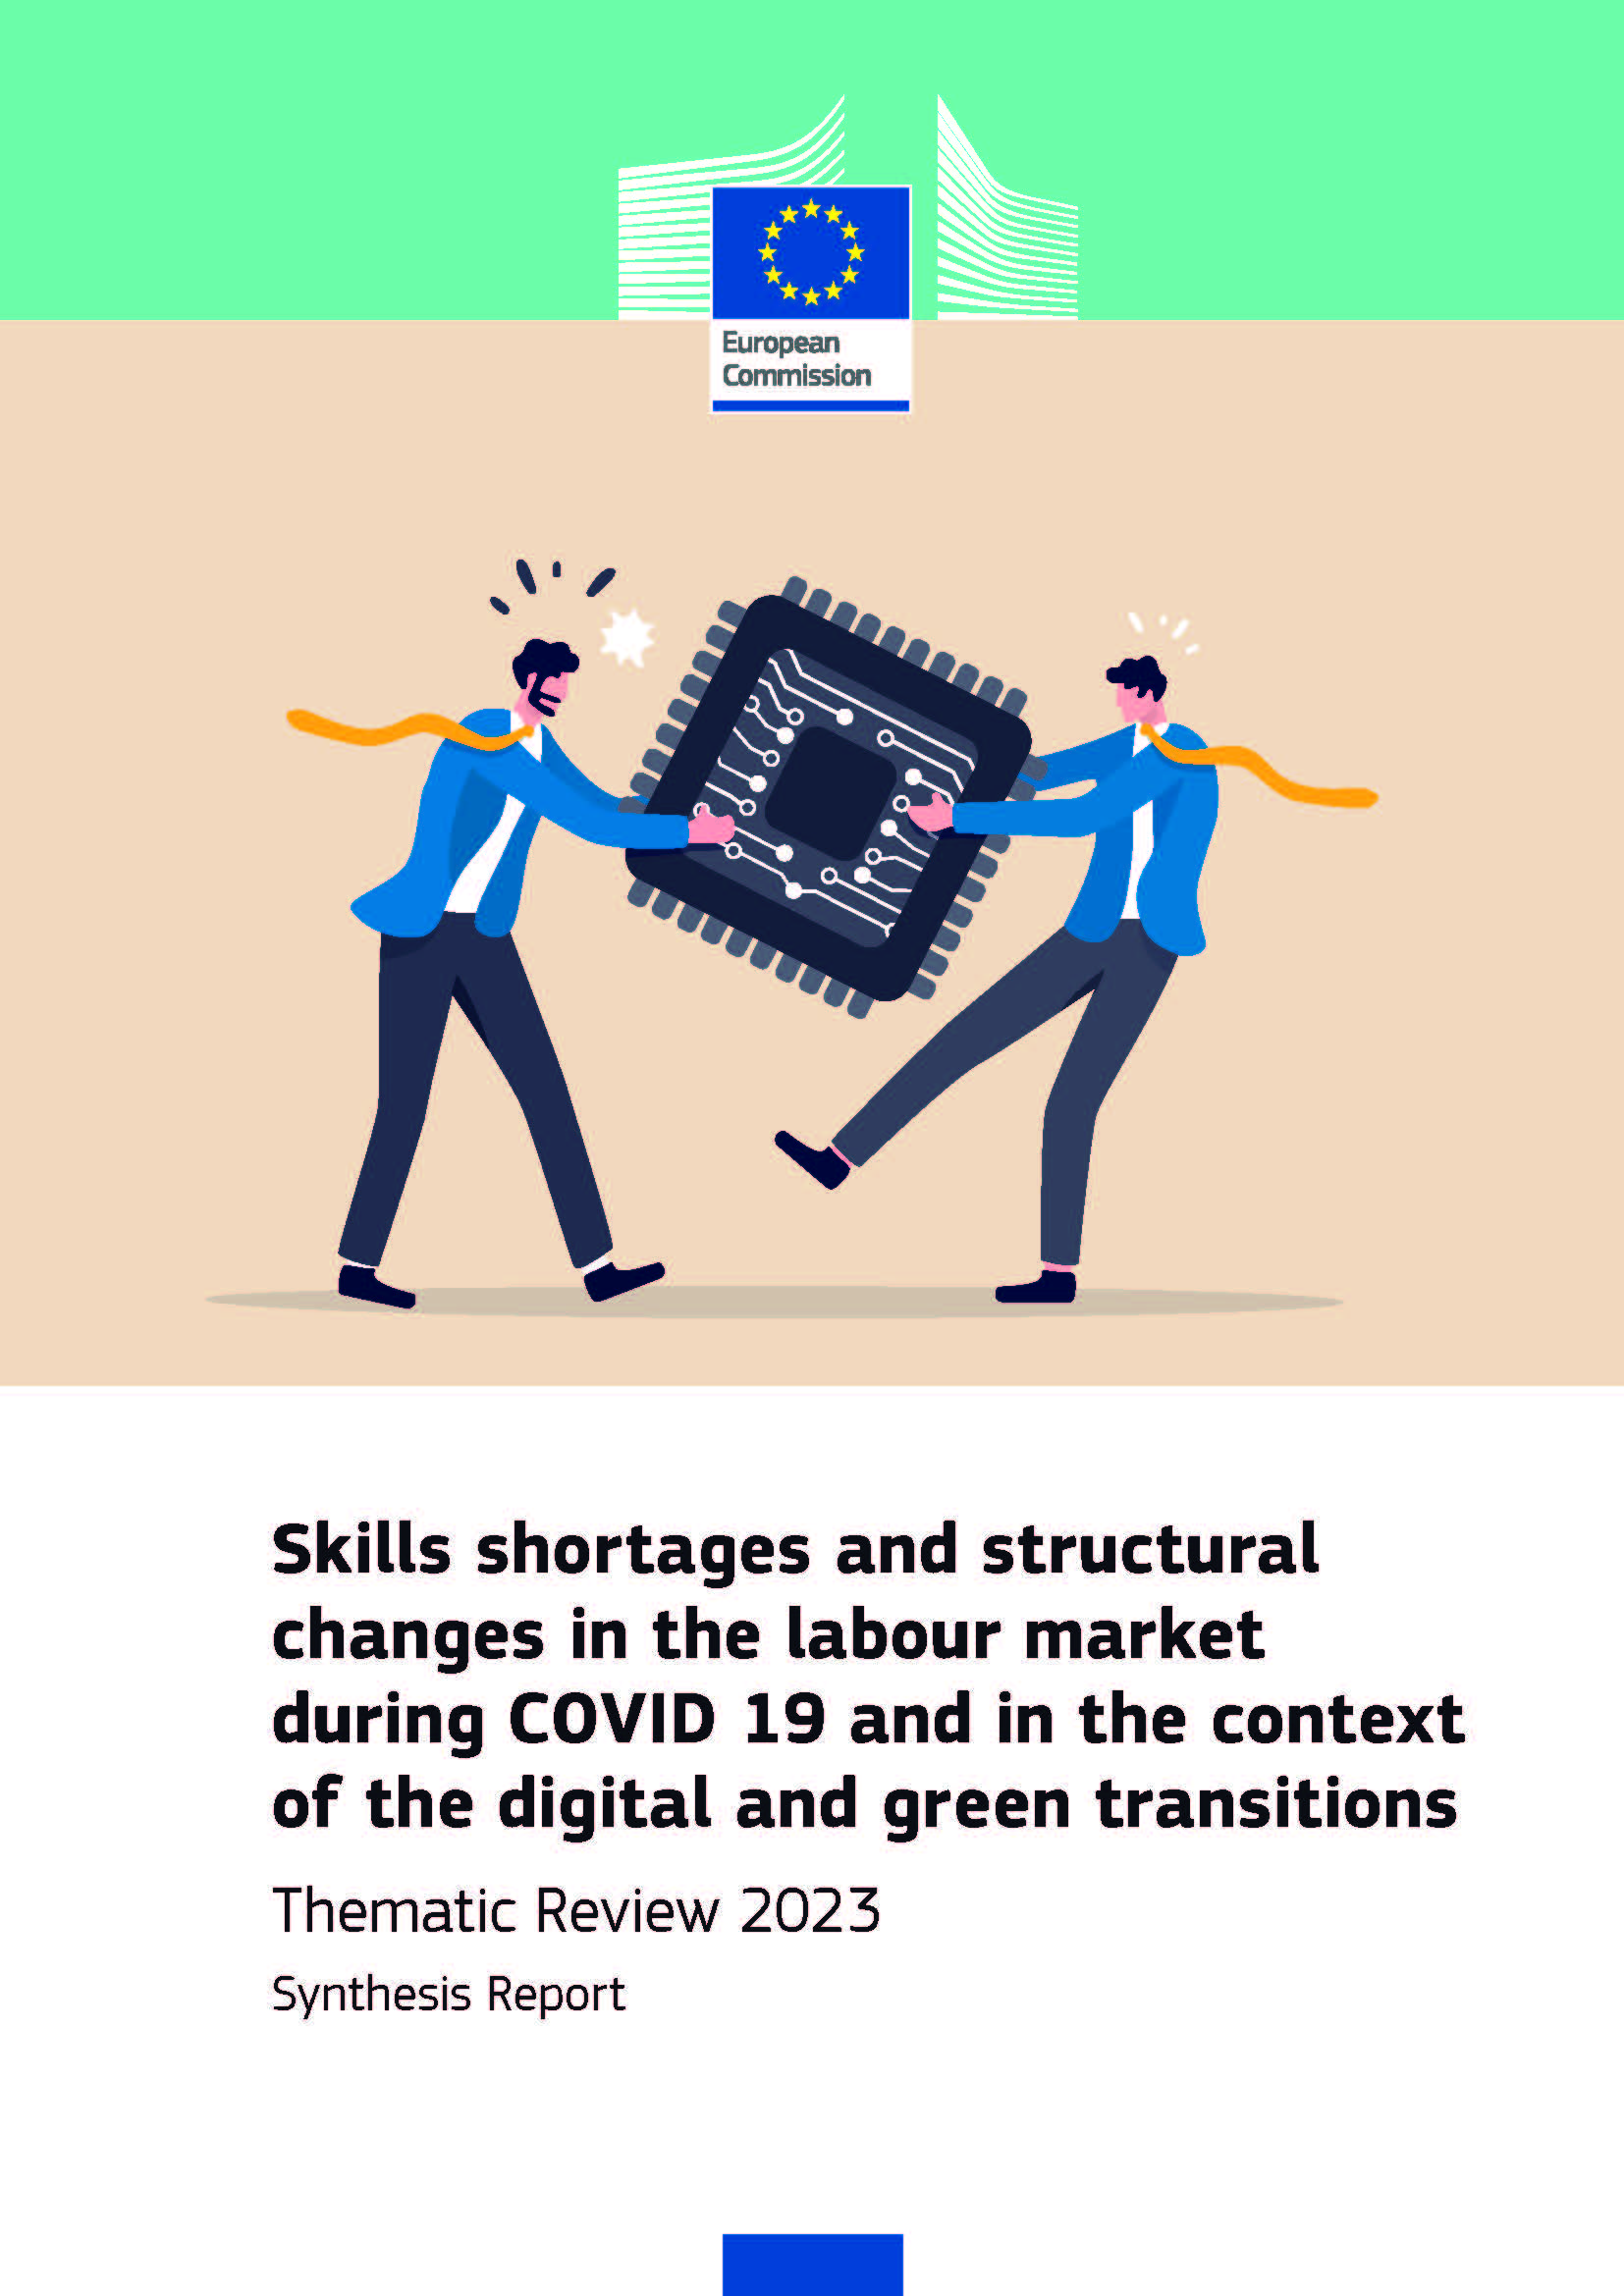 Skills shortages and structural changes in the labour market during COVID 19 and in the context of the digital and green transitions - 
Thematic Review 2023